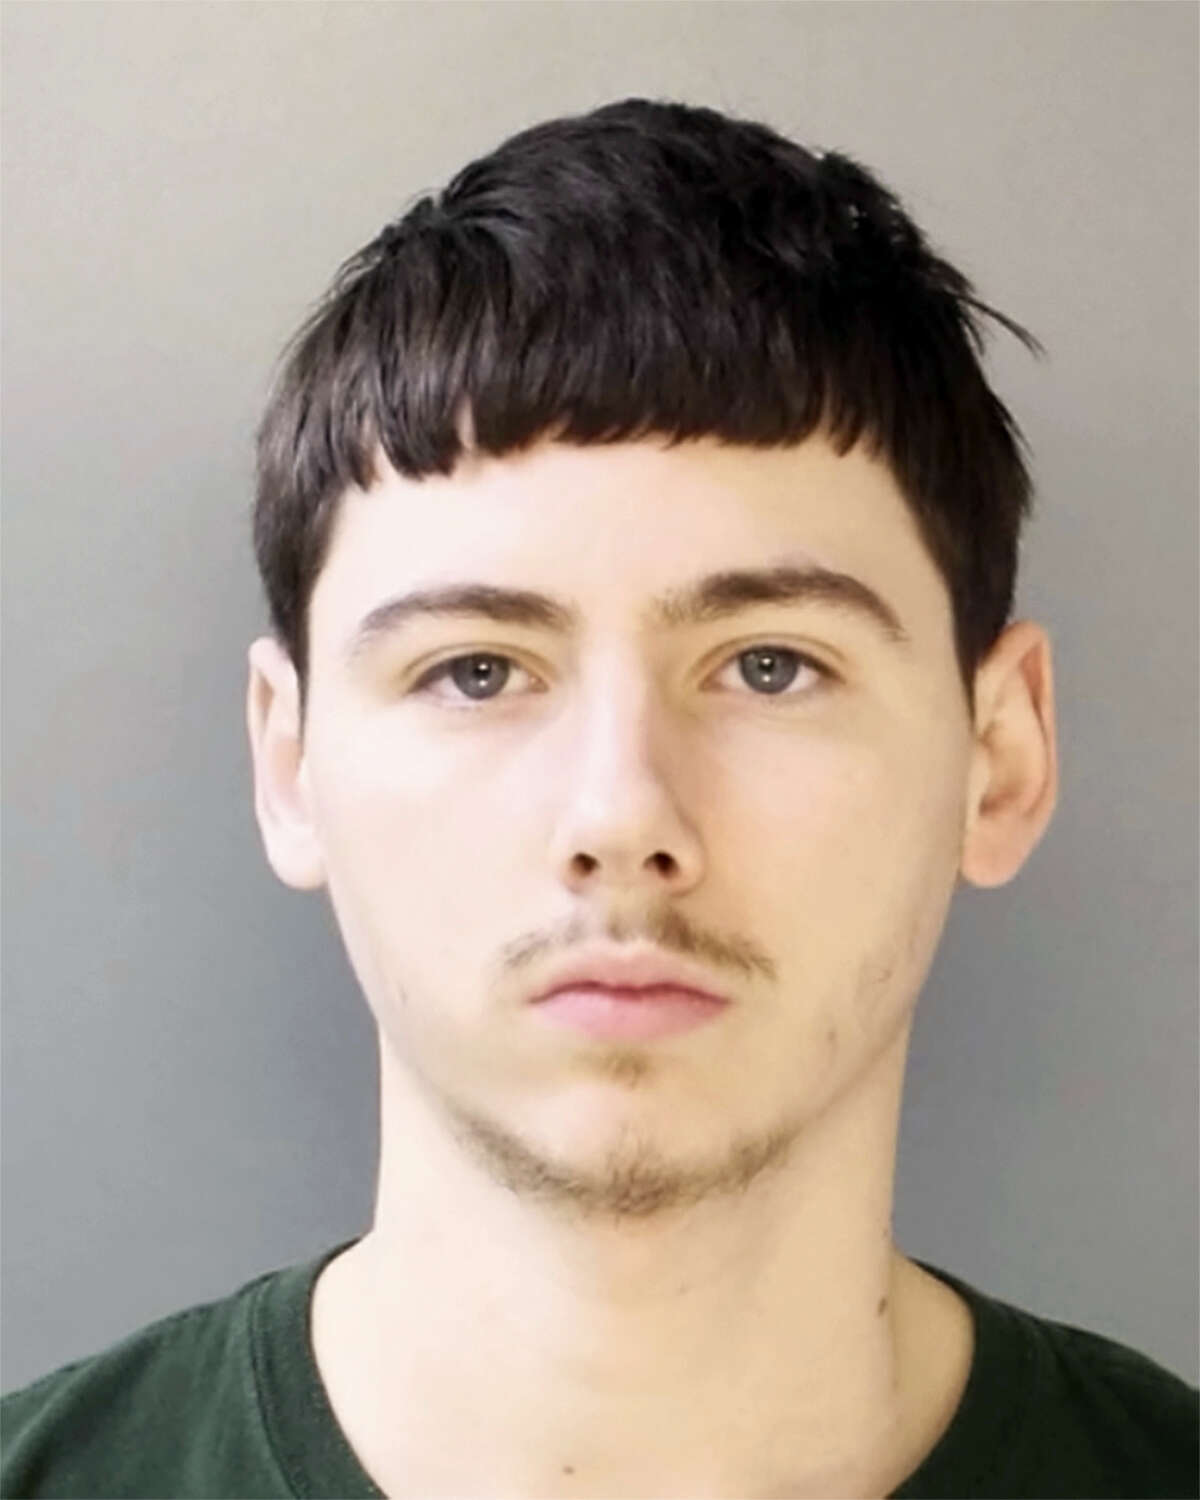 This undated photo provided by the Bucks County District Attorney’s Office in Doylestown, Pa., shows Sean Kratz of Philadelphia. Kratz was charged Friday, July 14, 2017, with 20 counts, including three counts of criminal homicide in the Friday, July 7, 2017, killings of three Pennsylvania men. Cosmo DiNardo, an admitted drug dealer with a history of mental illness was also charged in the July 5, 2017, killing of a fourth man.